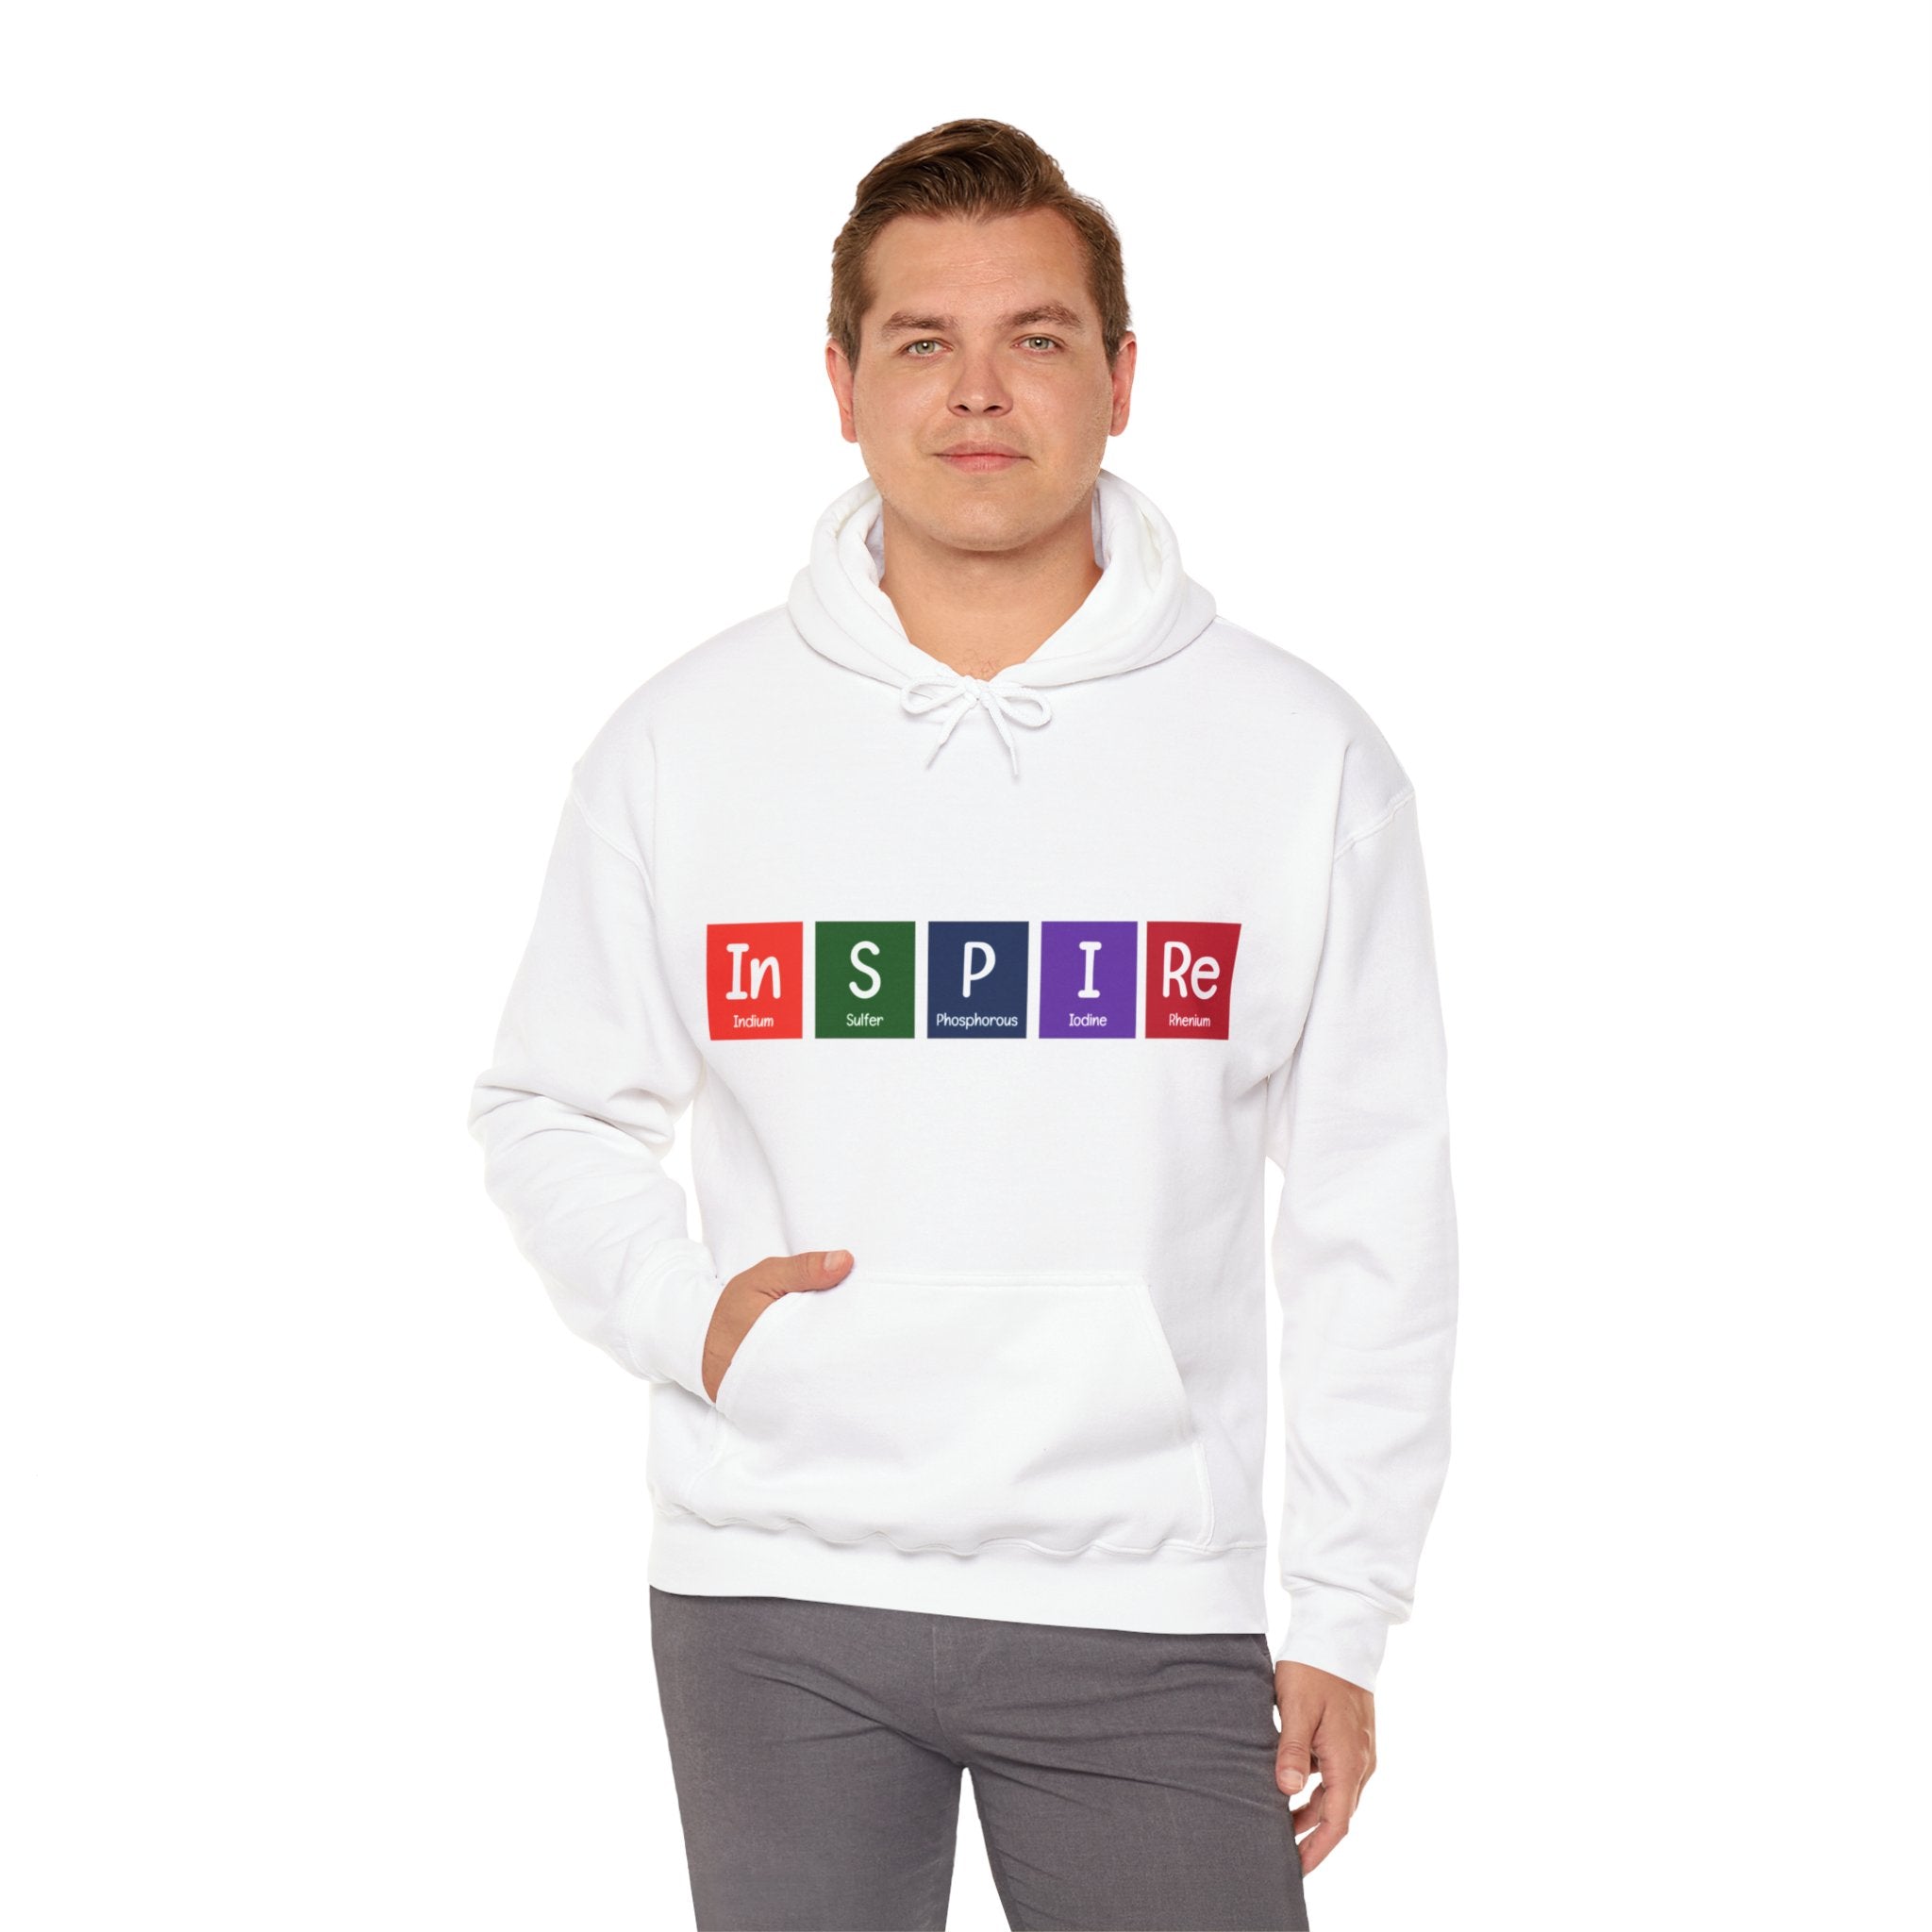 A person wearing an In-S-P-I-Re - Hooded Sweatshirt in soft, breathable cotton, with "INSPIRE" spelled out using element symbols and colors, stands against a plain background. Perfect for daily wear.